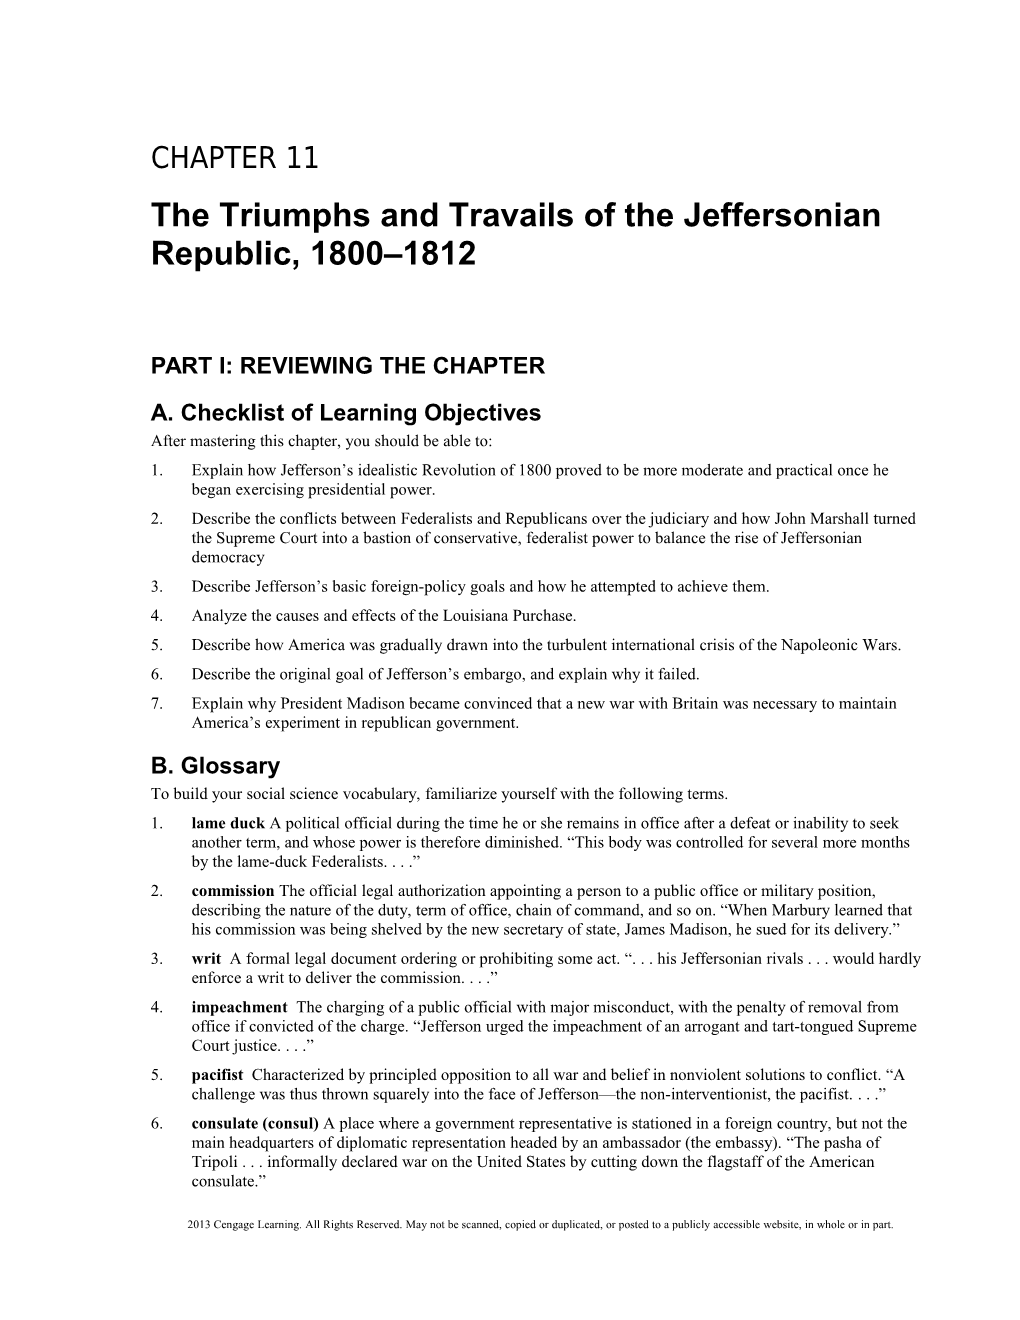 The Triumphs and Travails of the Jeffersonian Republic, 1800 1812